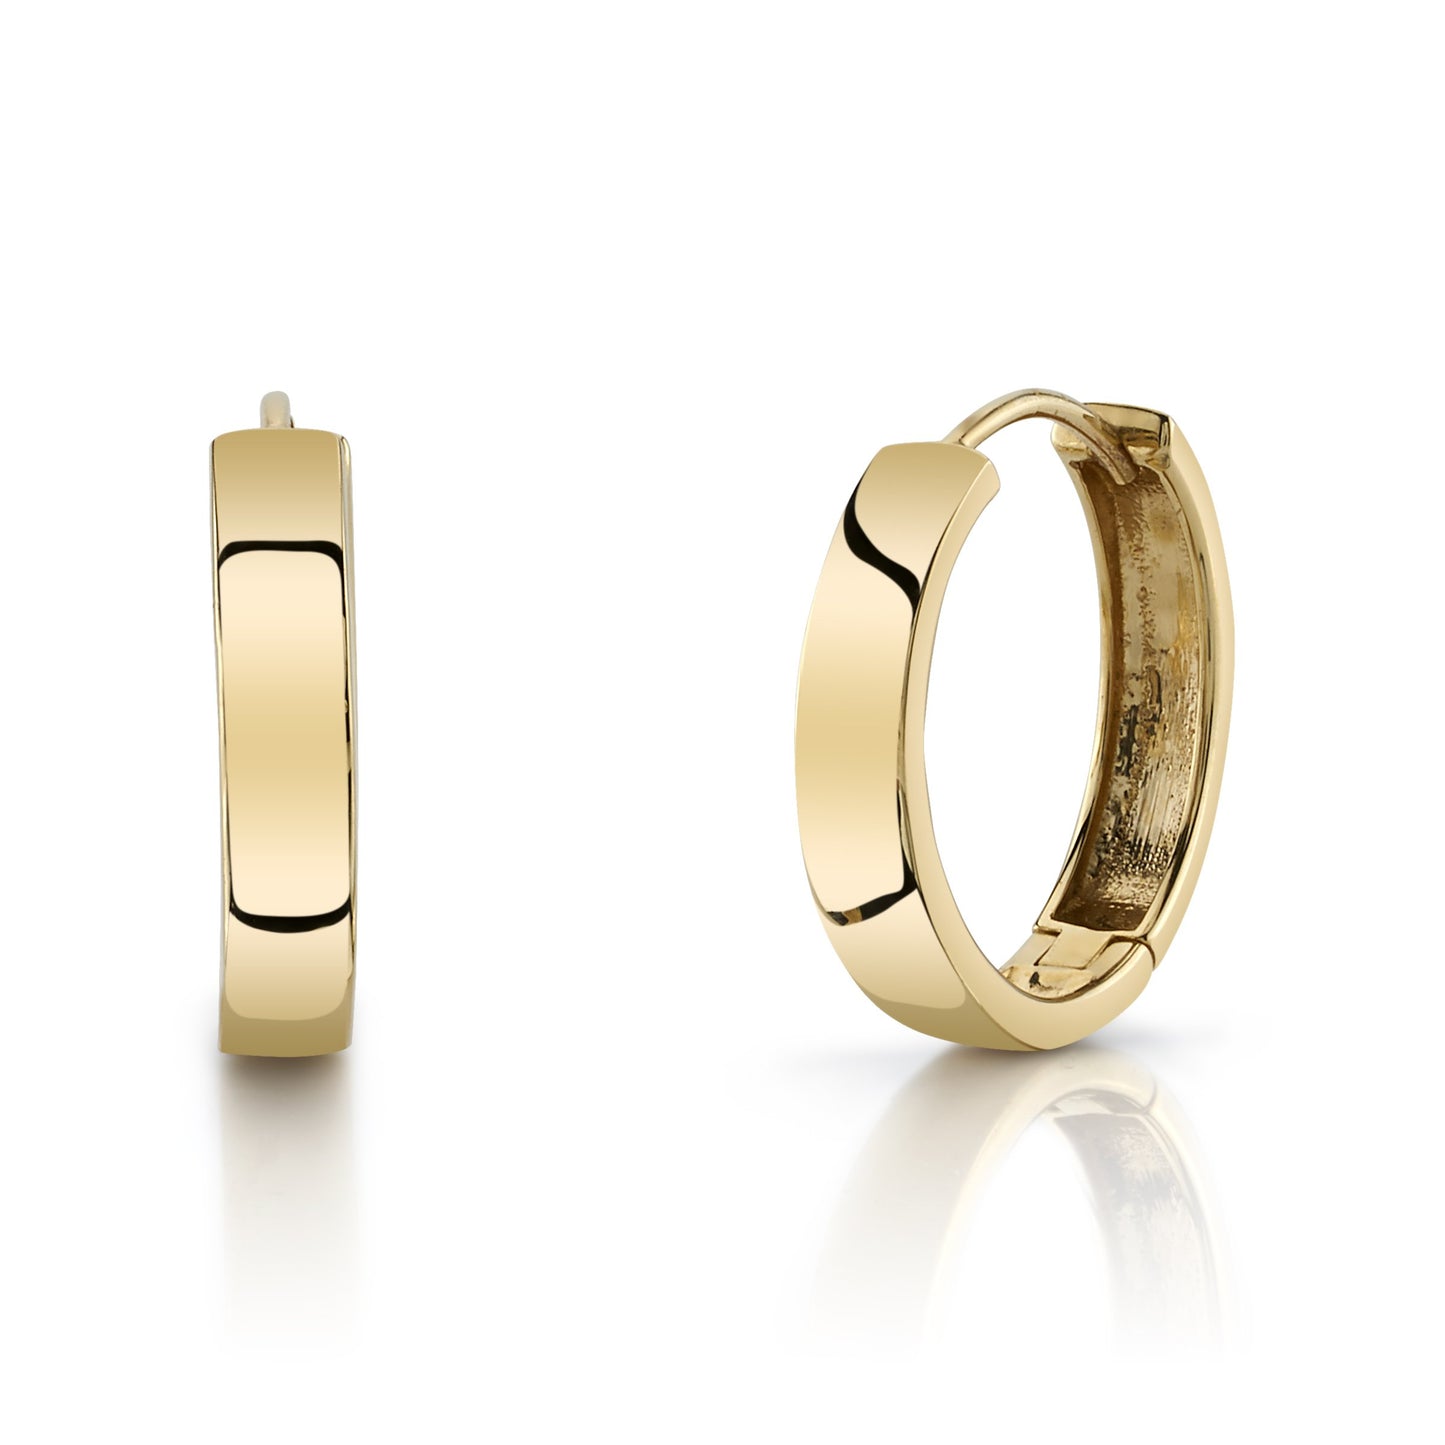 Large Hoops 14K Yellow Gold / Pair